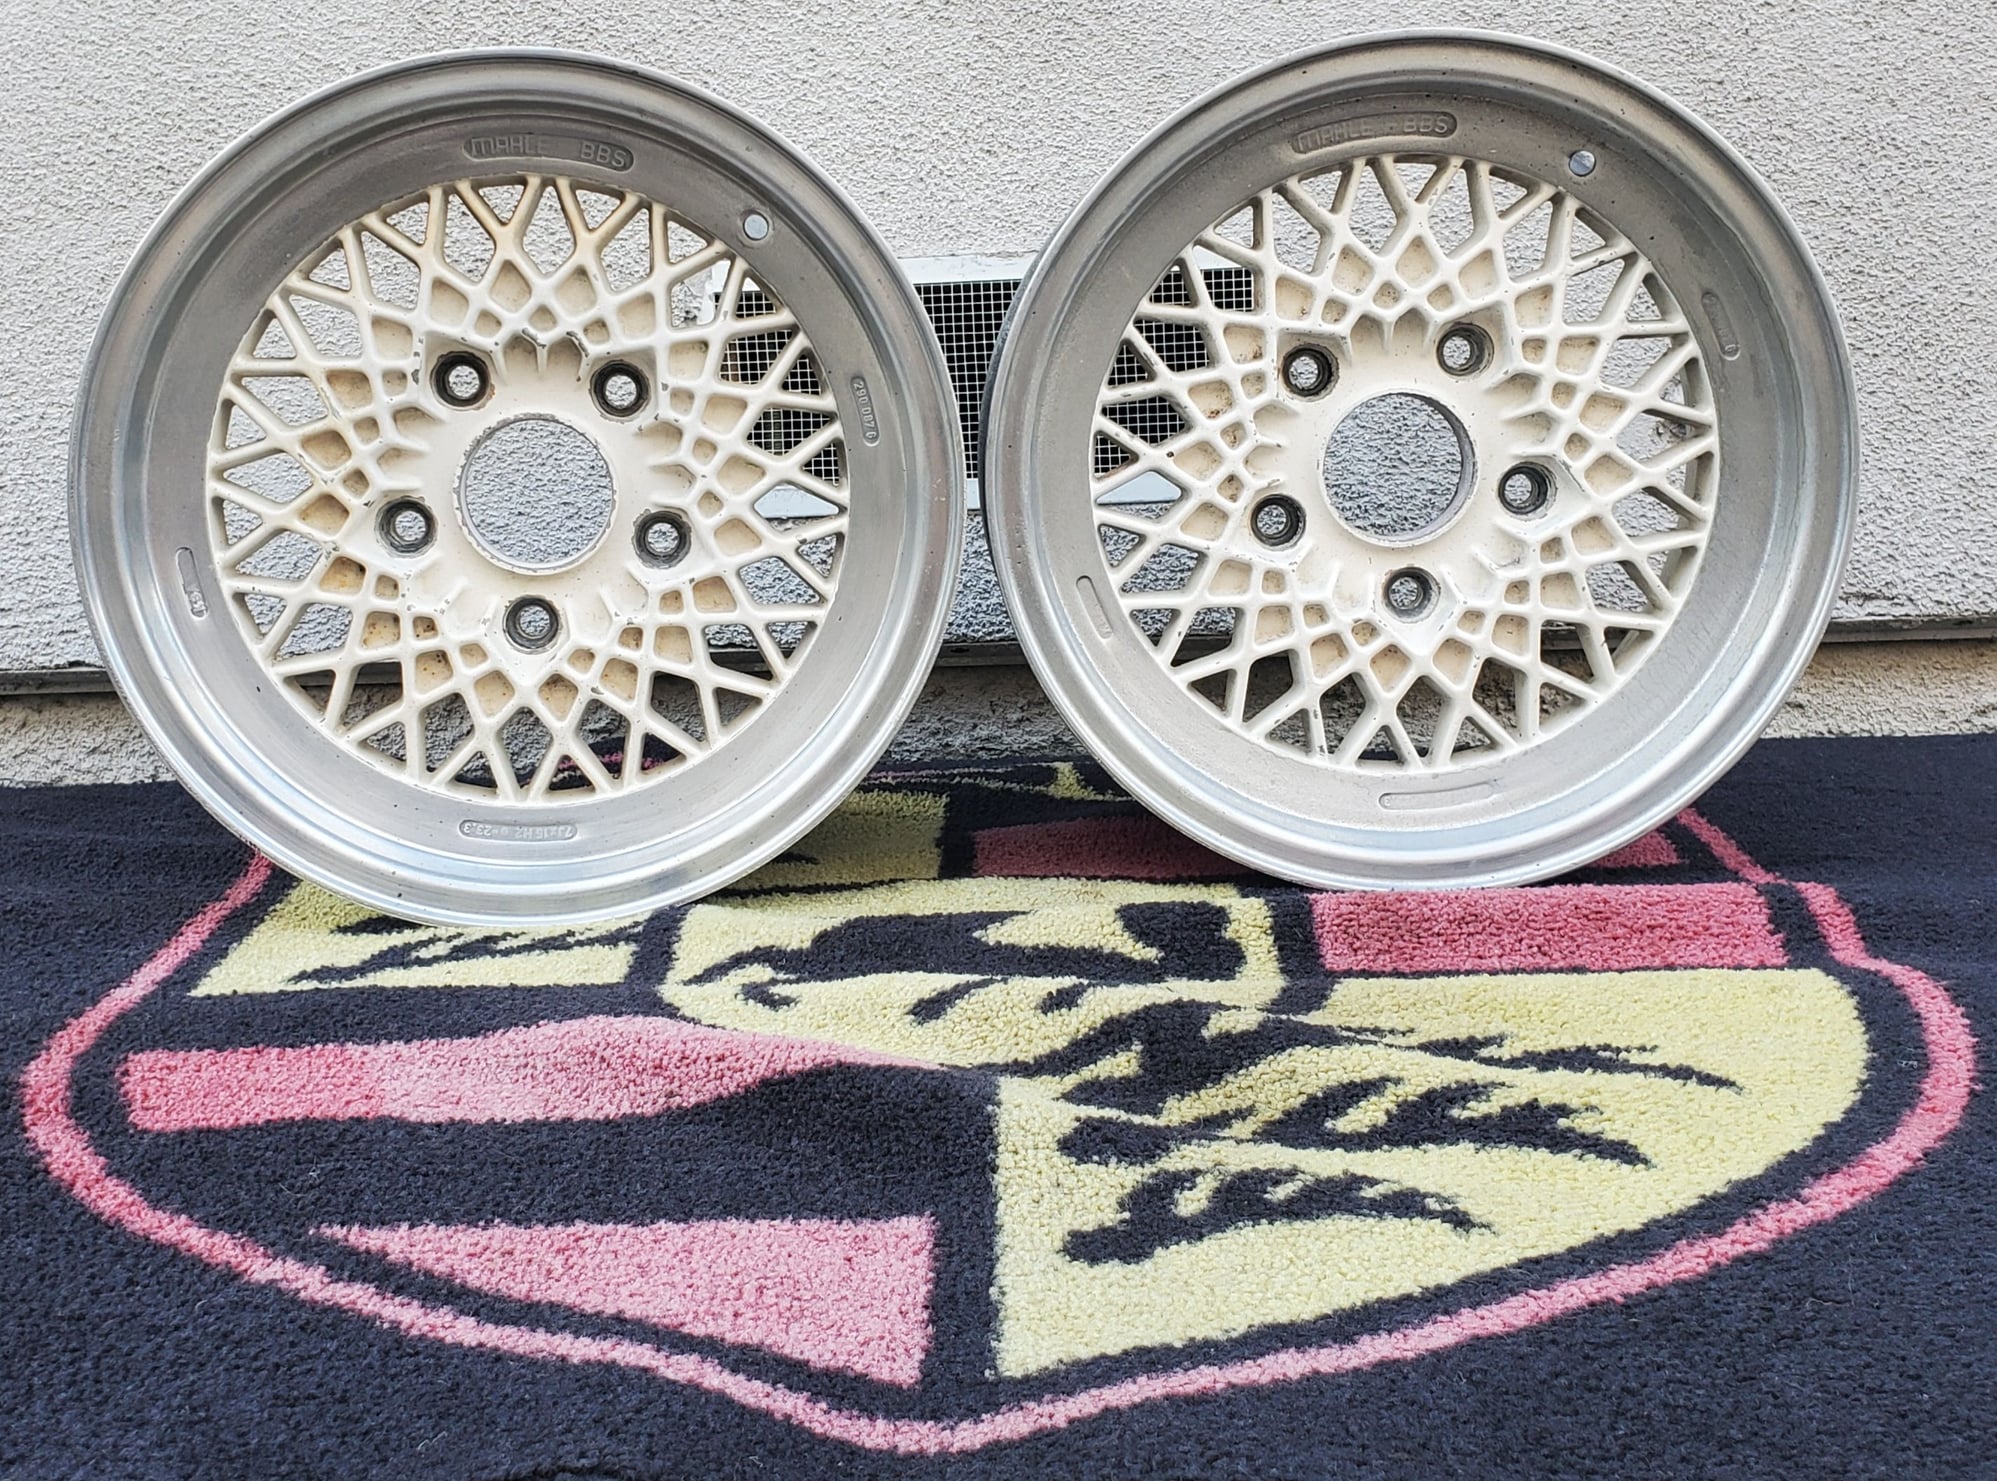 Wheels and Tires/Axles - 2 Mahle BBS 15x7 ET 23.3 Wheels - Used - 1974 to 1989 Porsche 911 - Los Angeles, CA 90032, United States